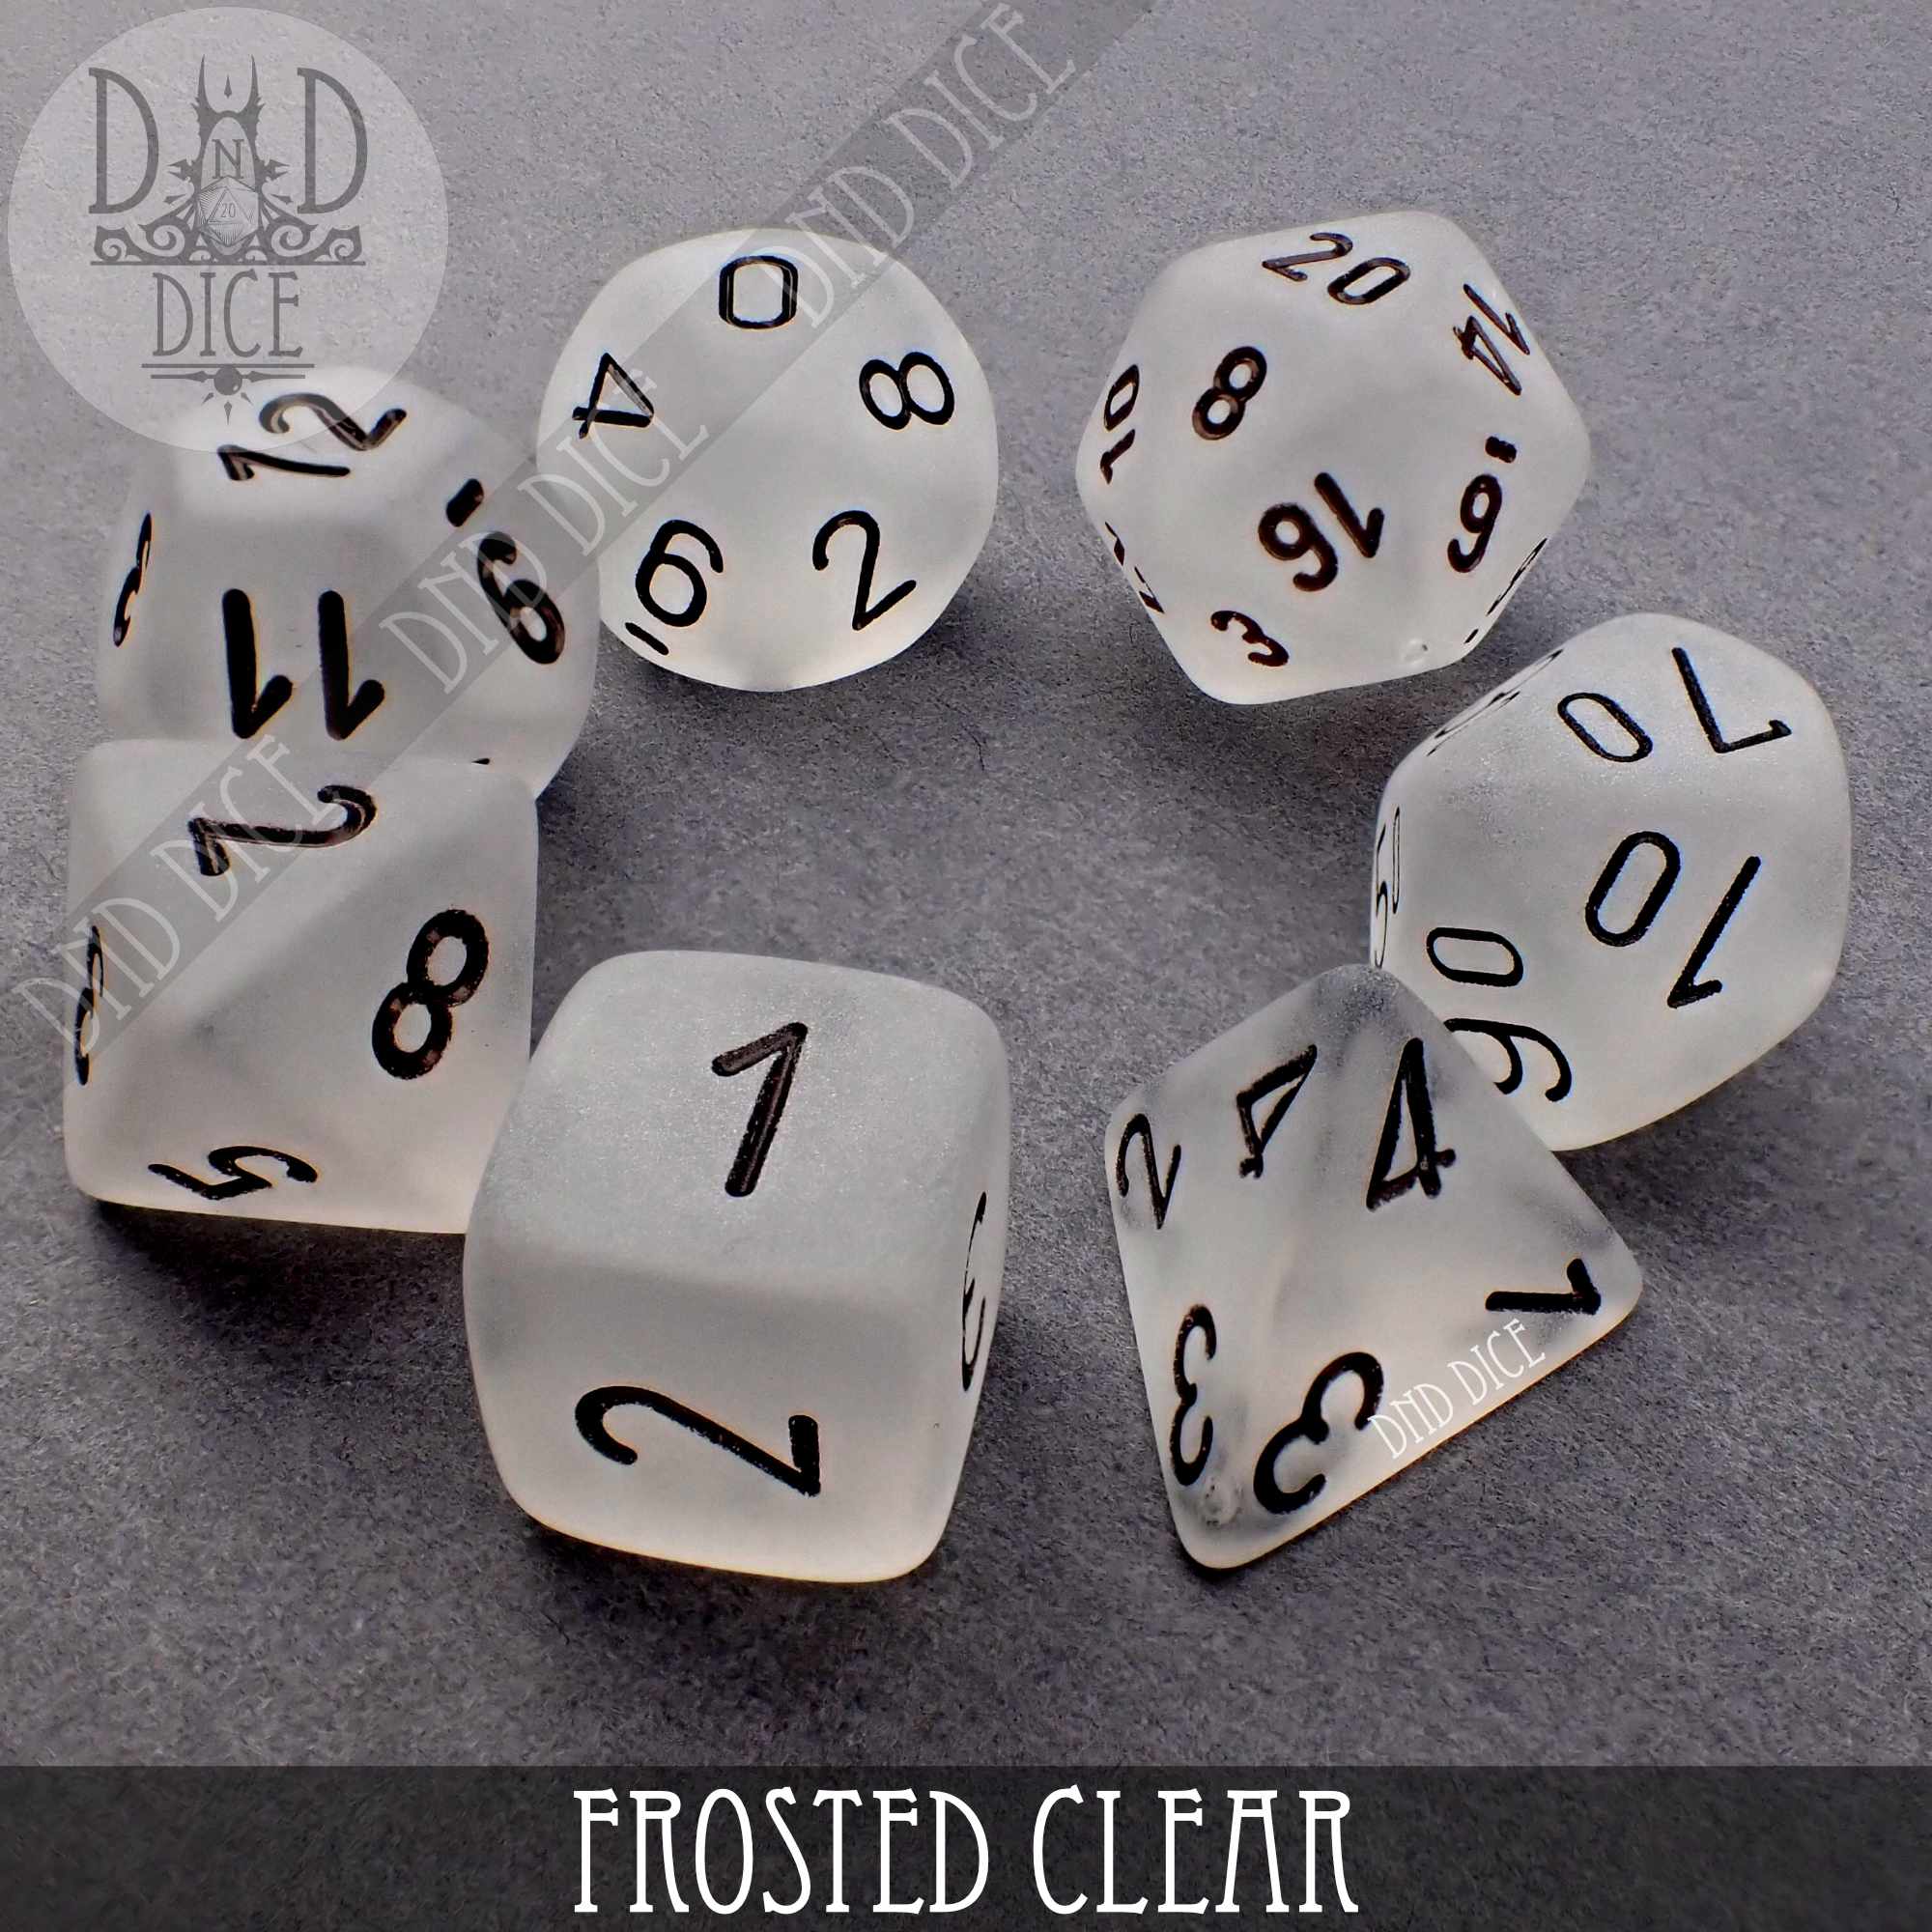 Frosted Clear Dice Set